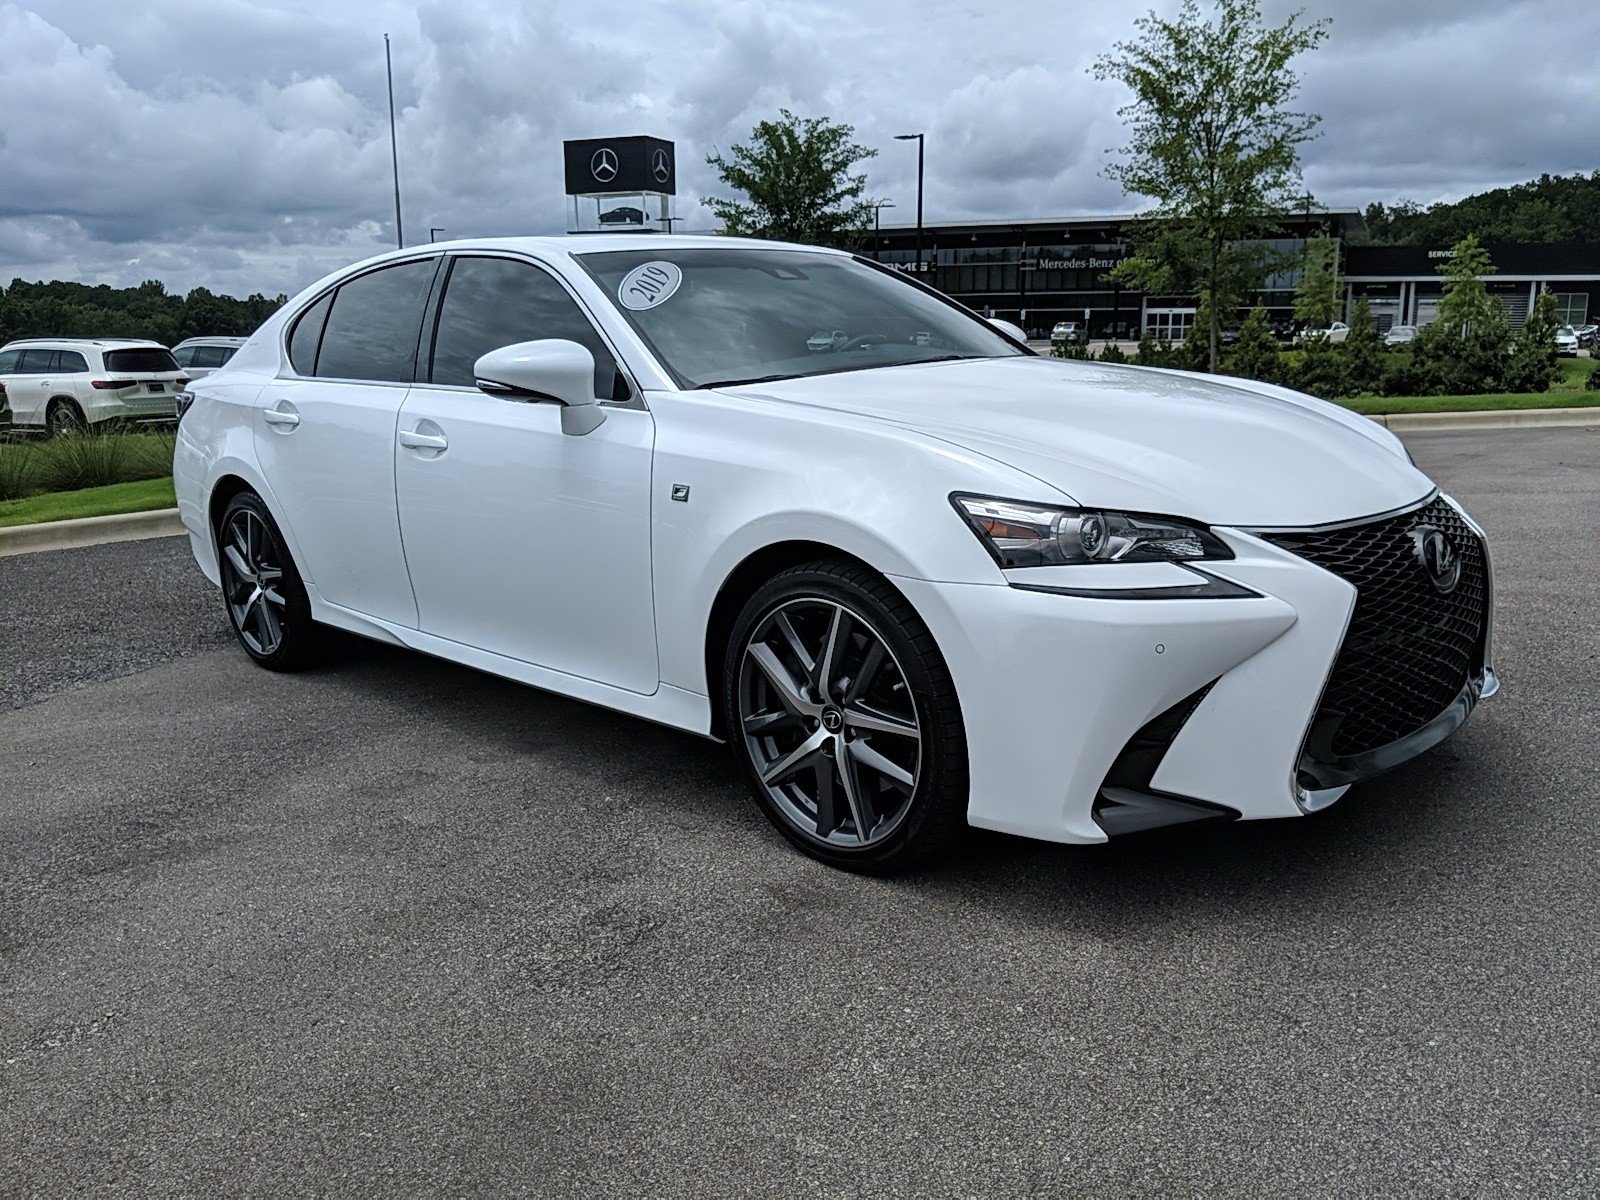 PreOwned 2019 Lexus GS 350 F Sport 4dr Car in Irondale 